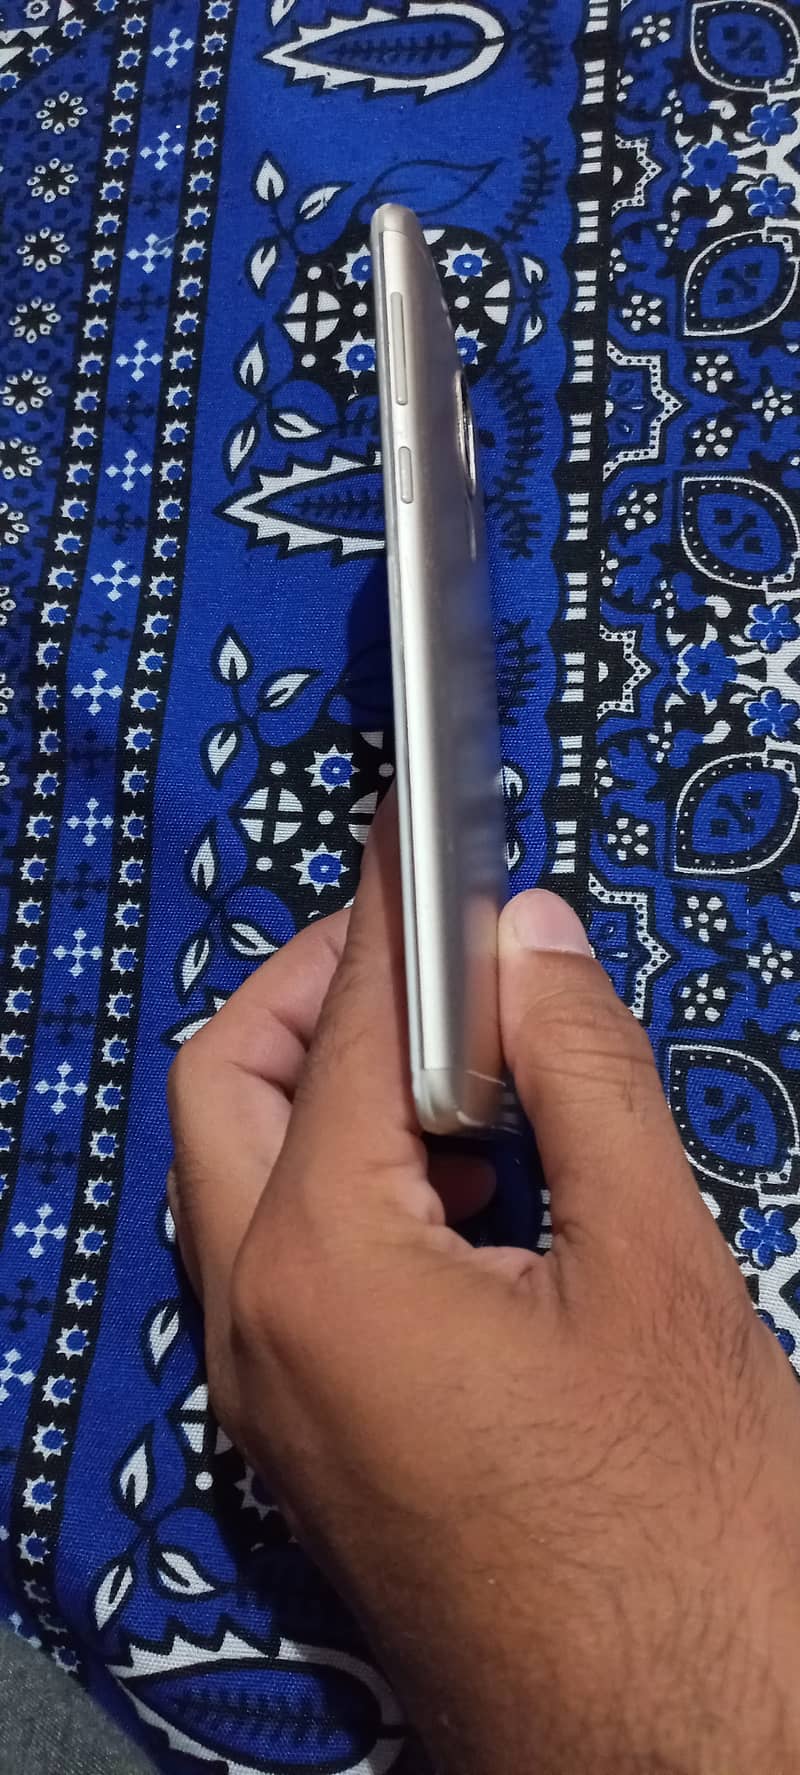 Huawei Honor 6x storage 3/32 for sale in good condition 3